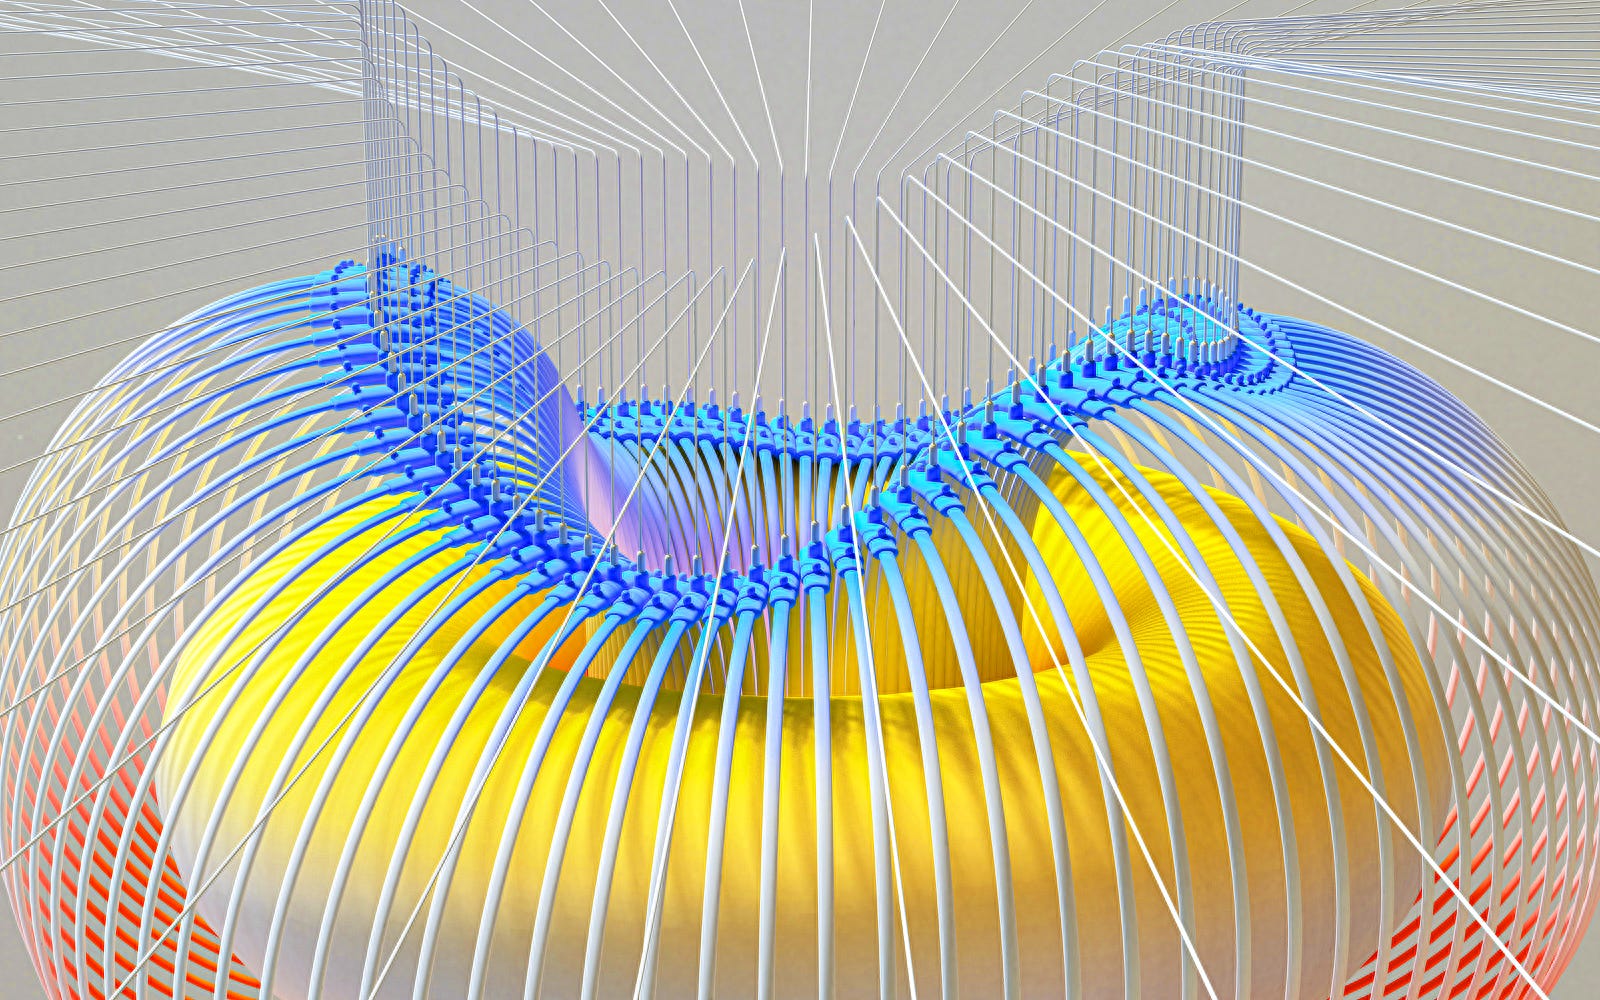 A cartoon image of a donut-like structure (colored yellow), with strings emanating from it in a sphere. One significant risk associated with artificial intelligence in drug discovery is the reliability and interpretability of the algorithms employed.